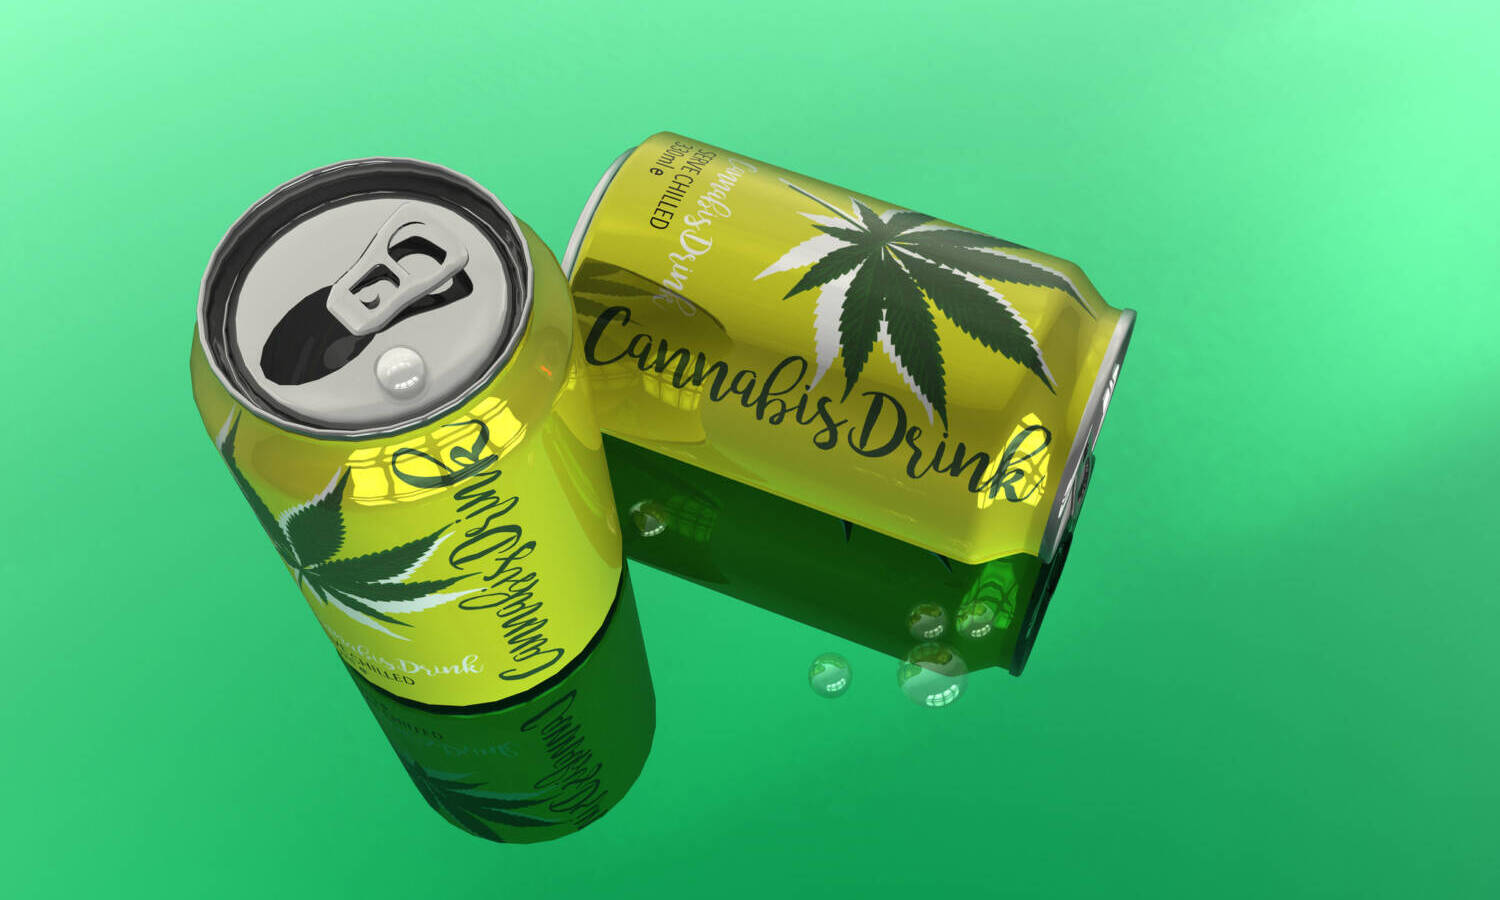 People Are Willing To Spend More On CBD Mood-Boosting Drinks Than On This